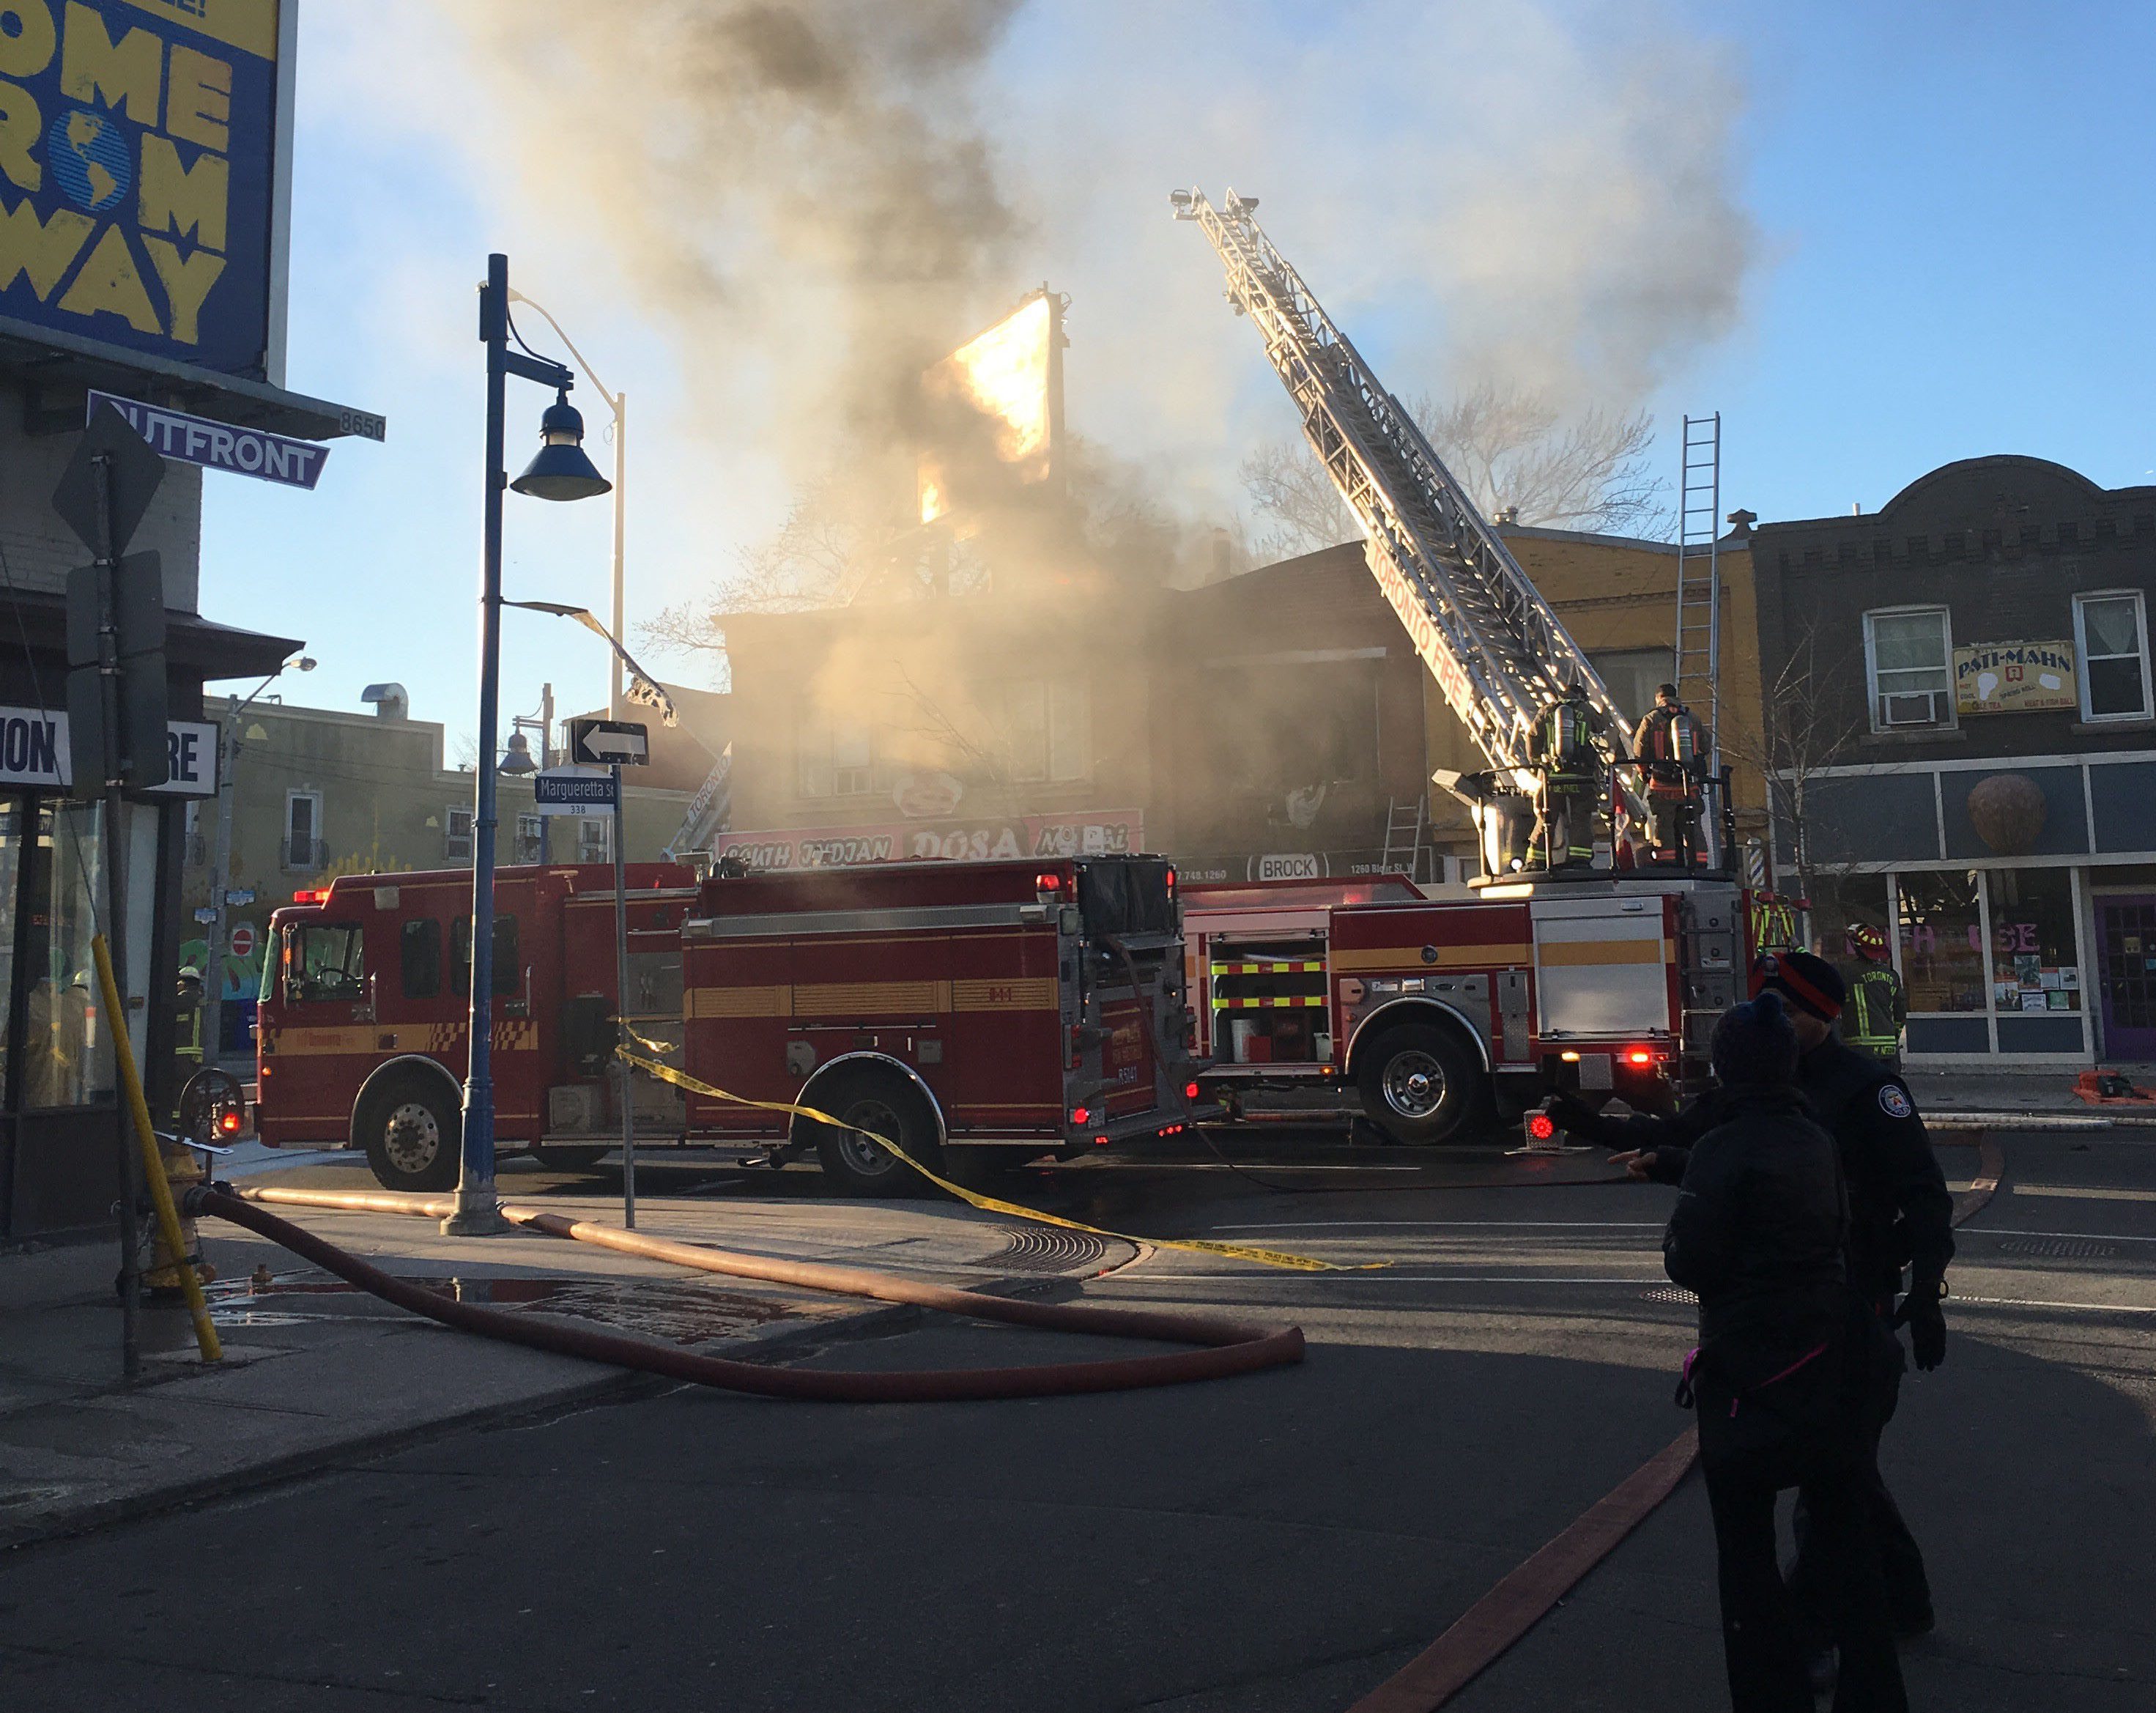 Emergency crews put out restaurant fire near Bloor and Lansdowne